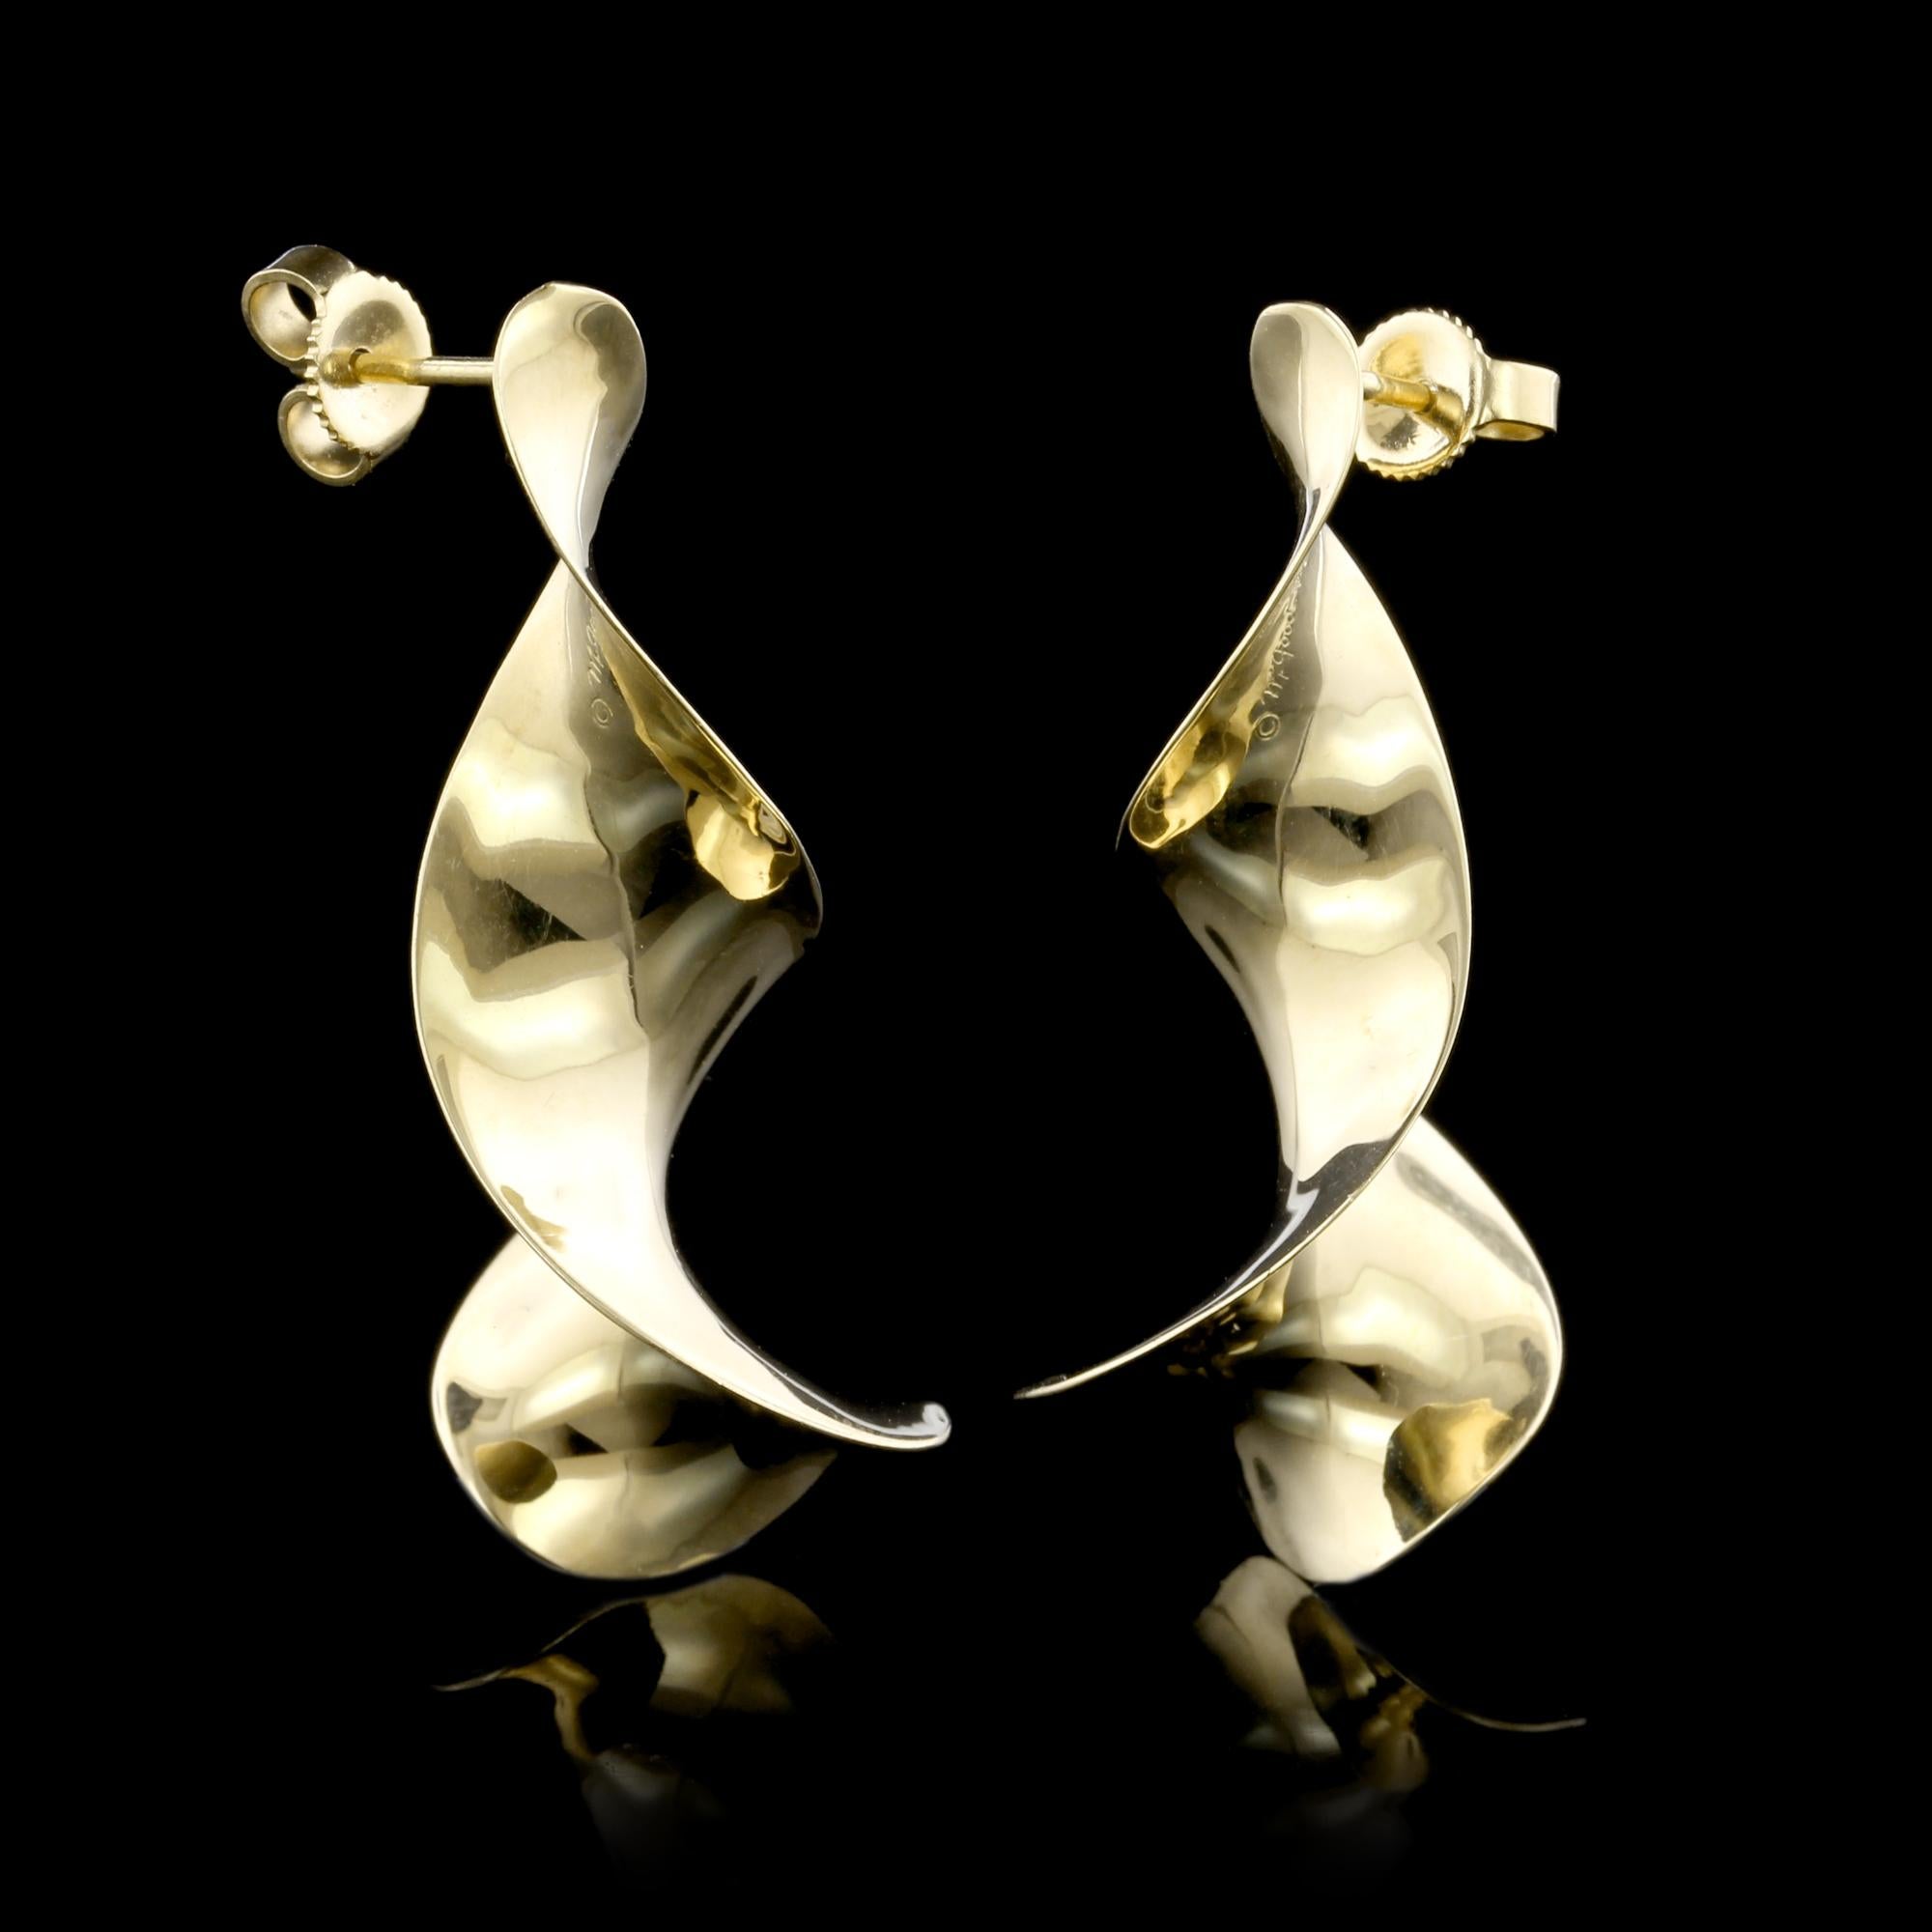 Michael Good 18K Yellow Gold Earrings. The earrings are spiral drops, length 1 1/2